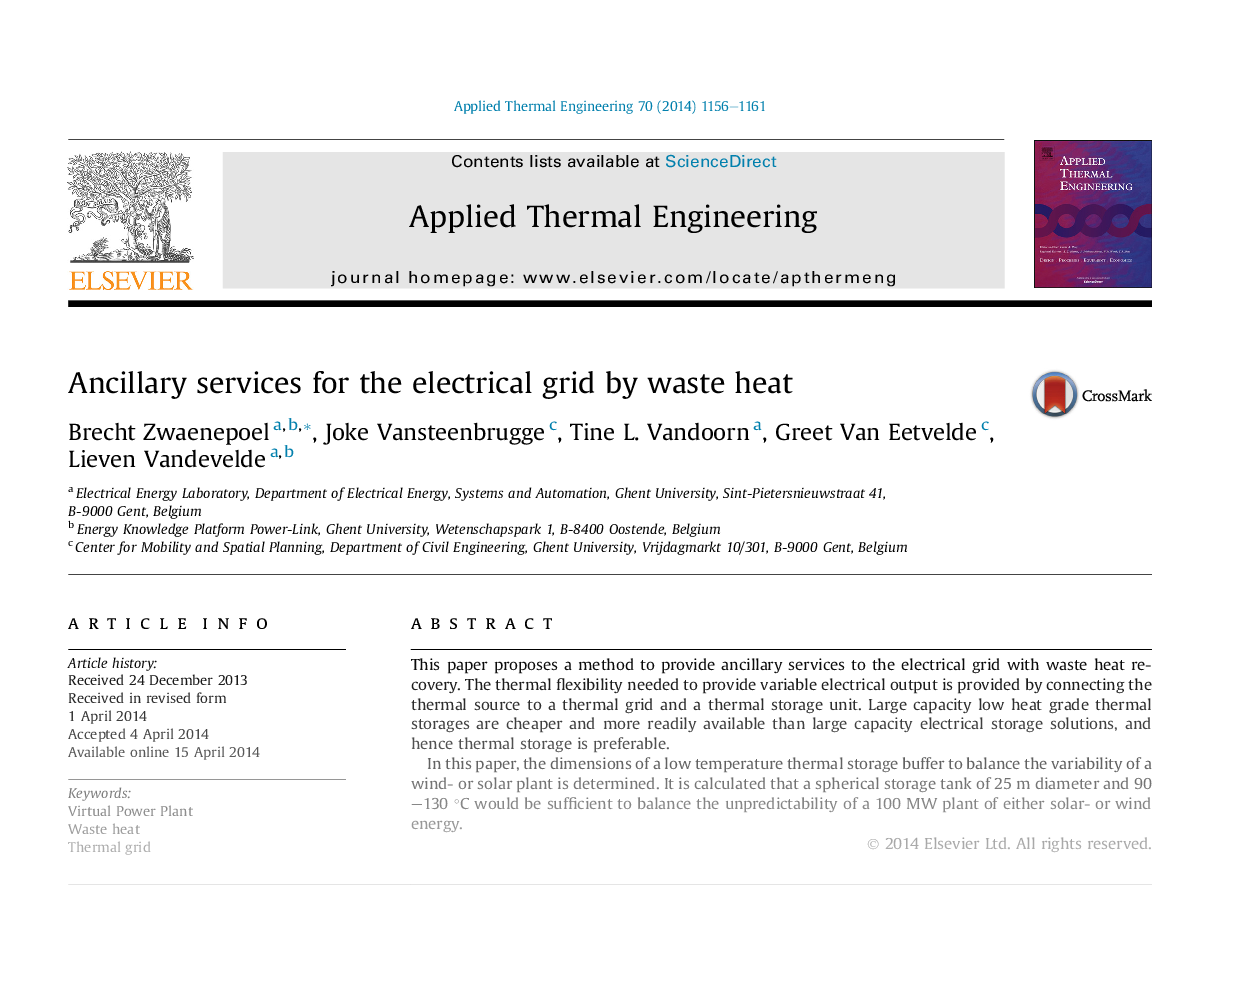 Ancillary services for the electrical grid by waste heat